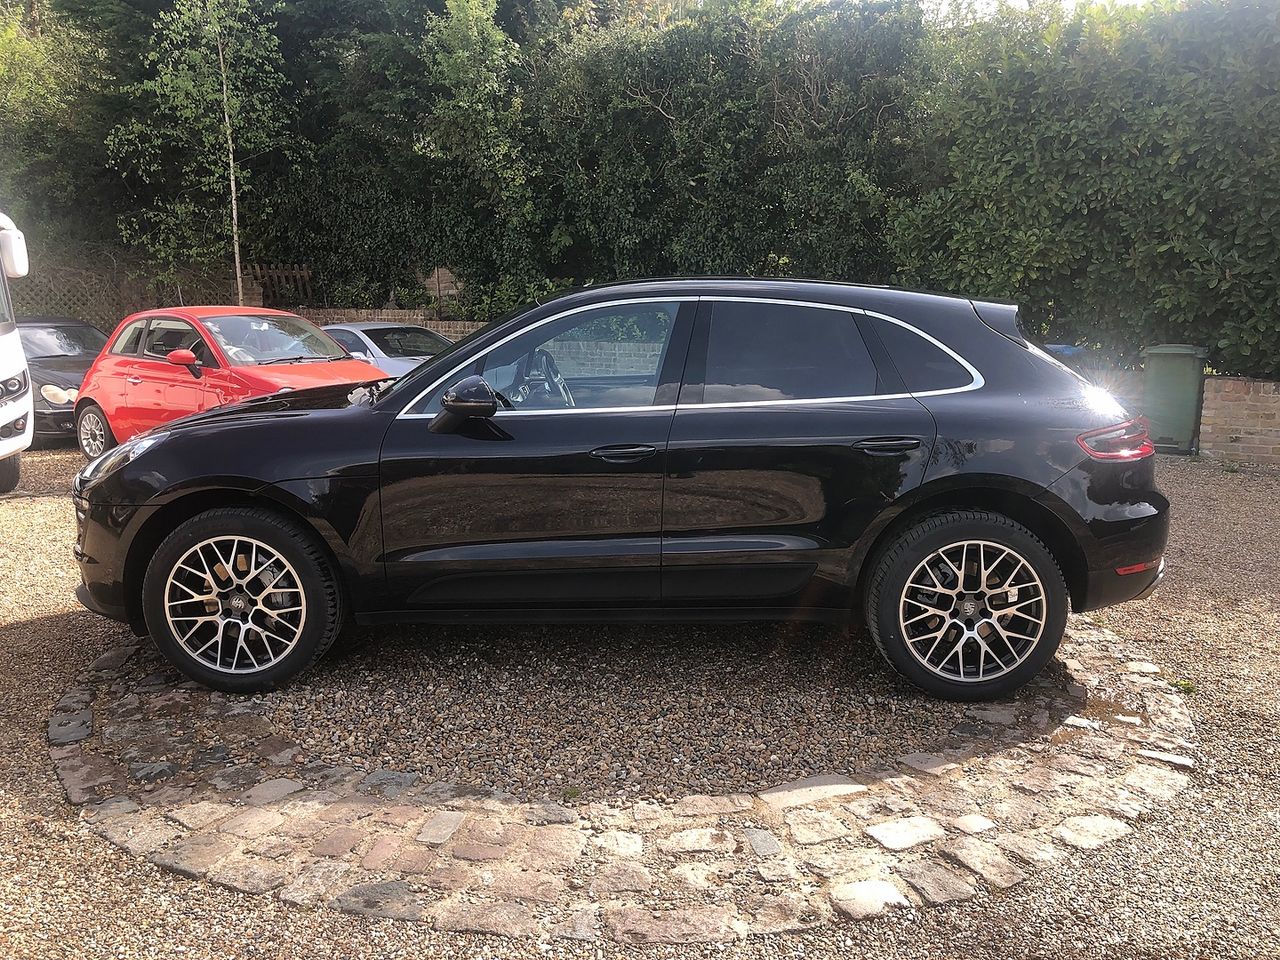 2017 PORSCHE Macan S 5dr PDK - Picture 5 of 16